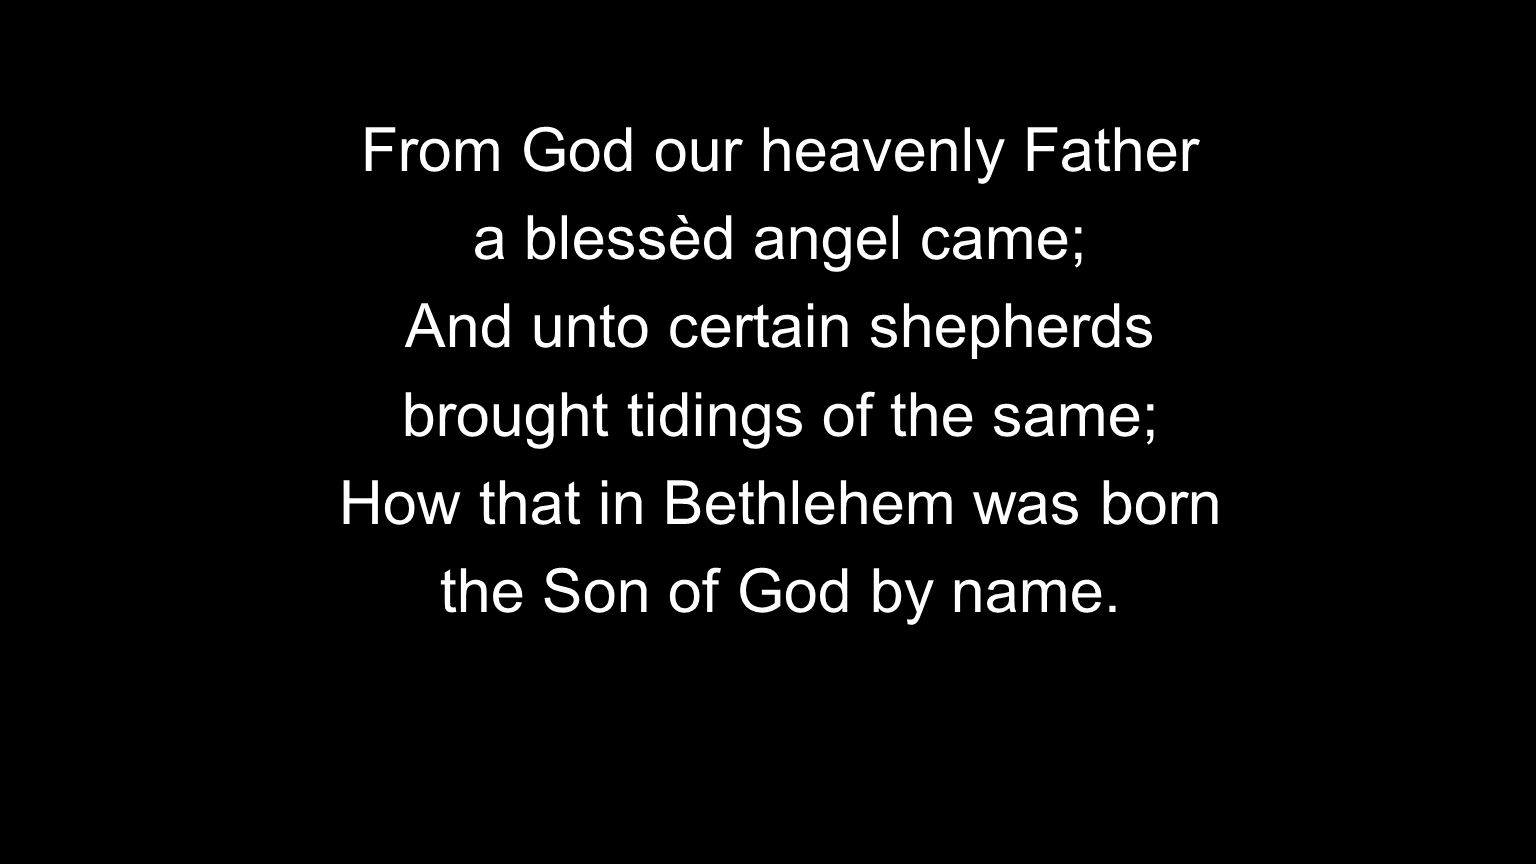 From God our heavenly Father a blessèd angel came; And unto certain shepherds brought tidings of the same; How that in Bethlehem was born the Son of God by name.